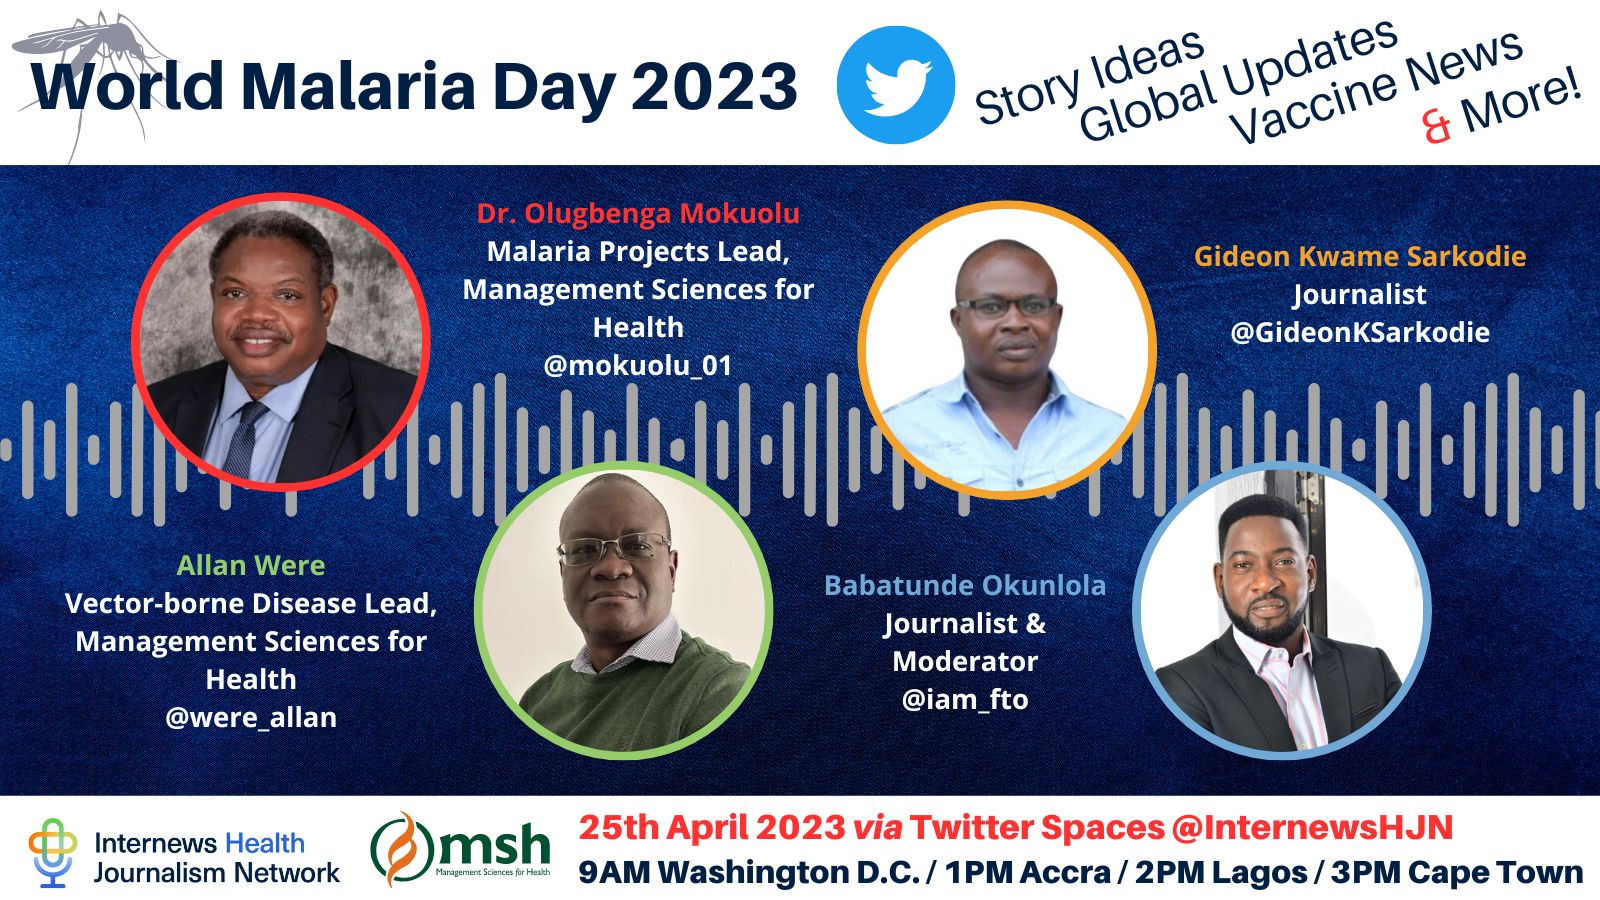 World Malaria Day 2023 Twitter Spaces event!